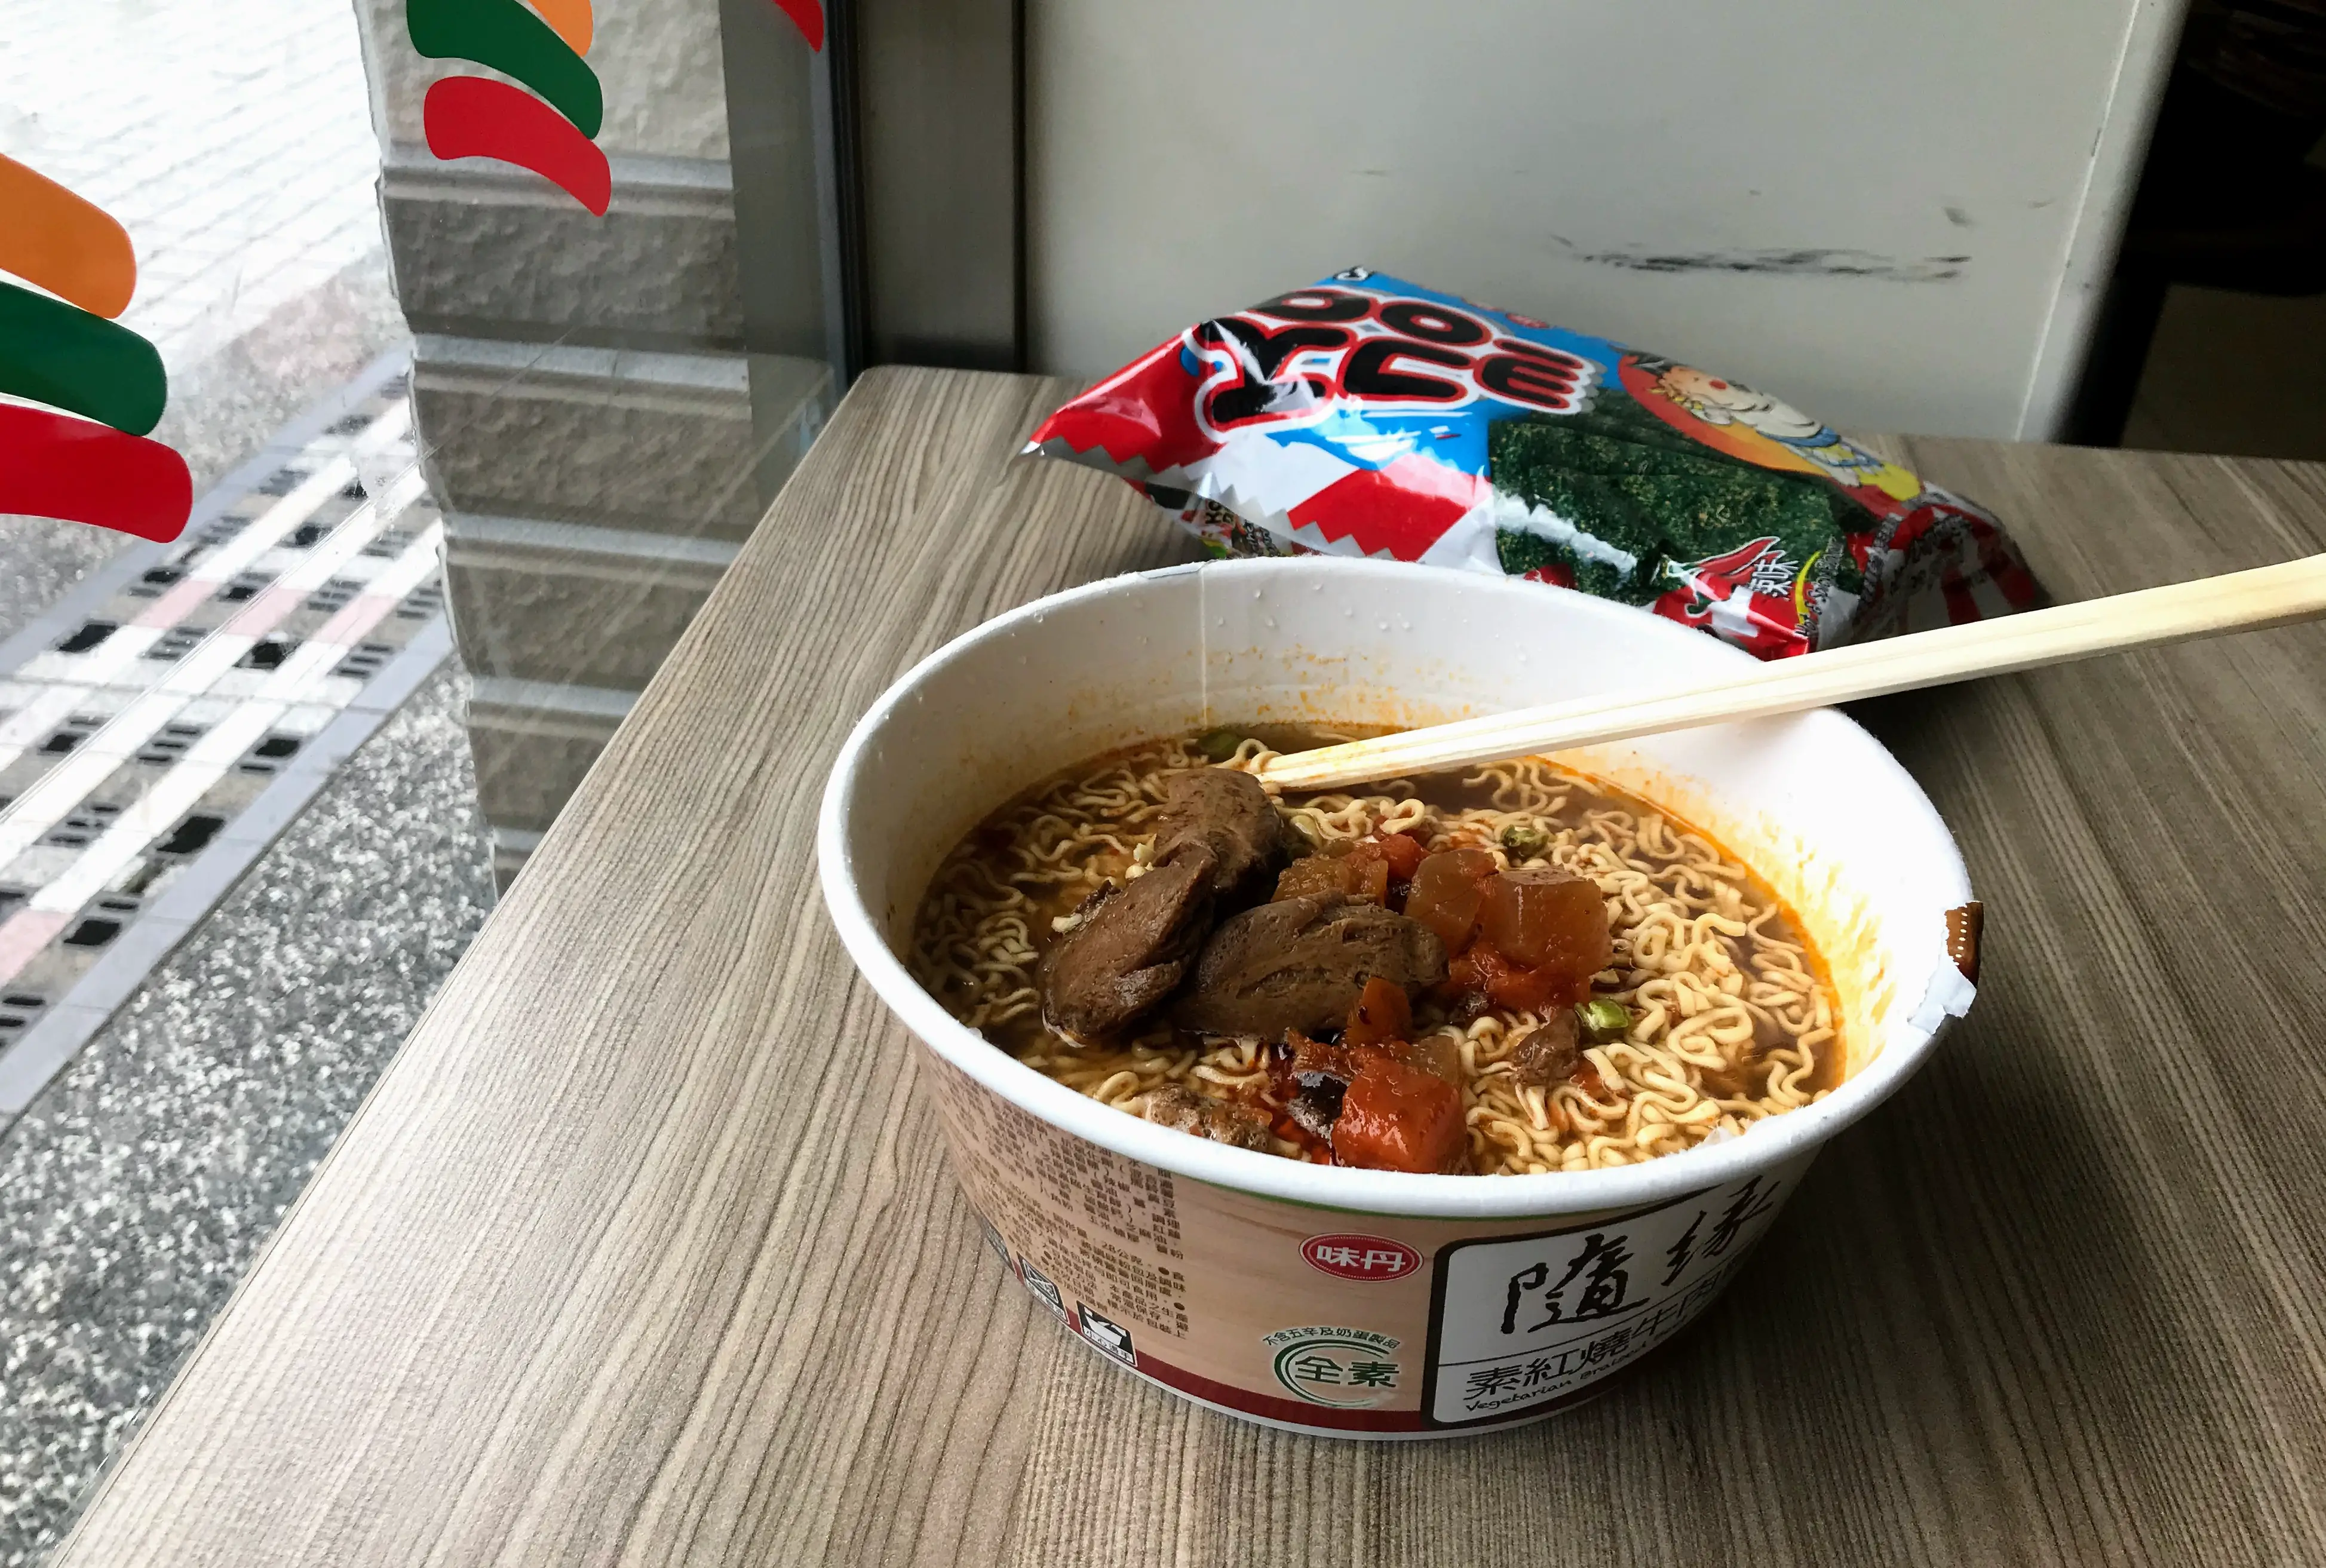 Mock meat noodles at 7-Eleven, Taiwan